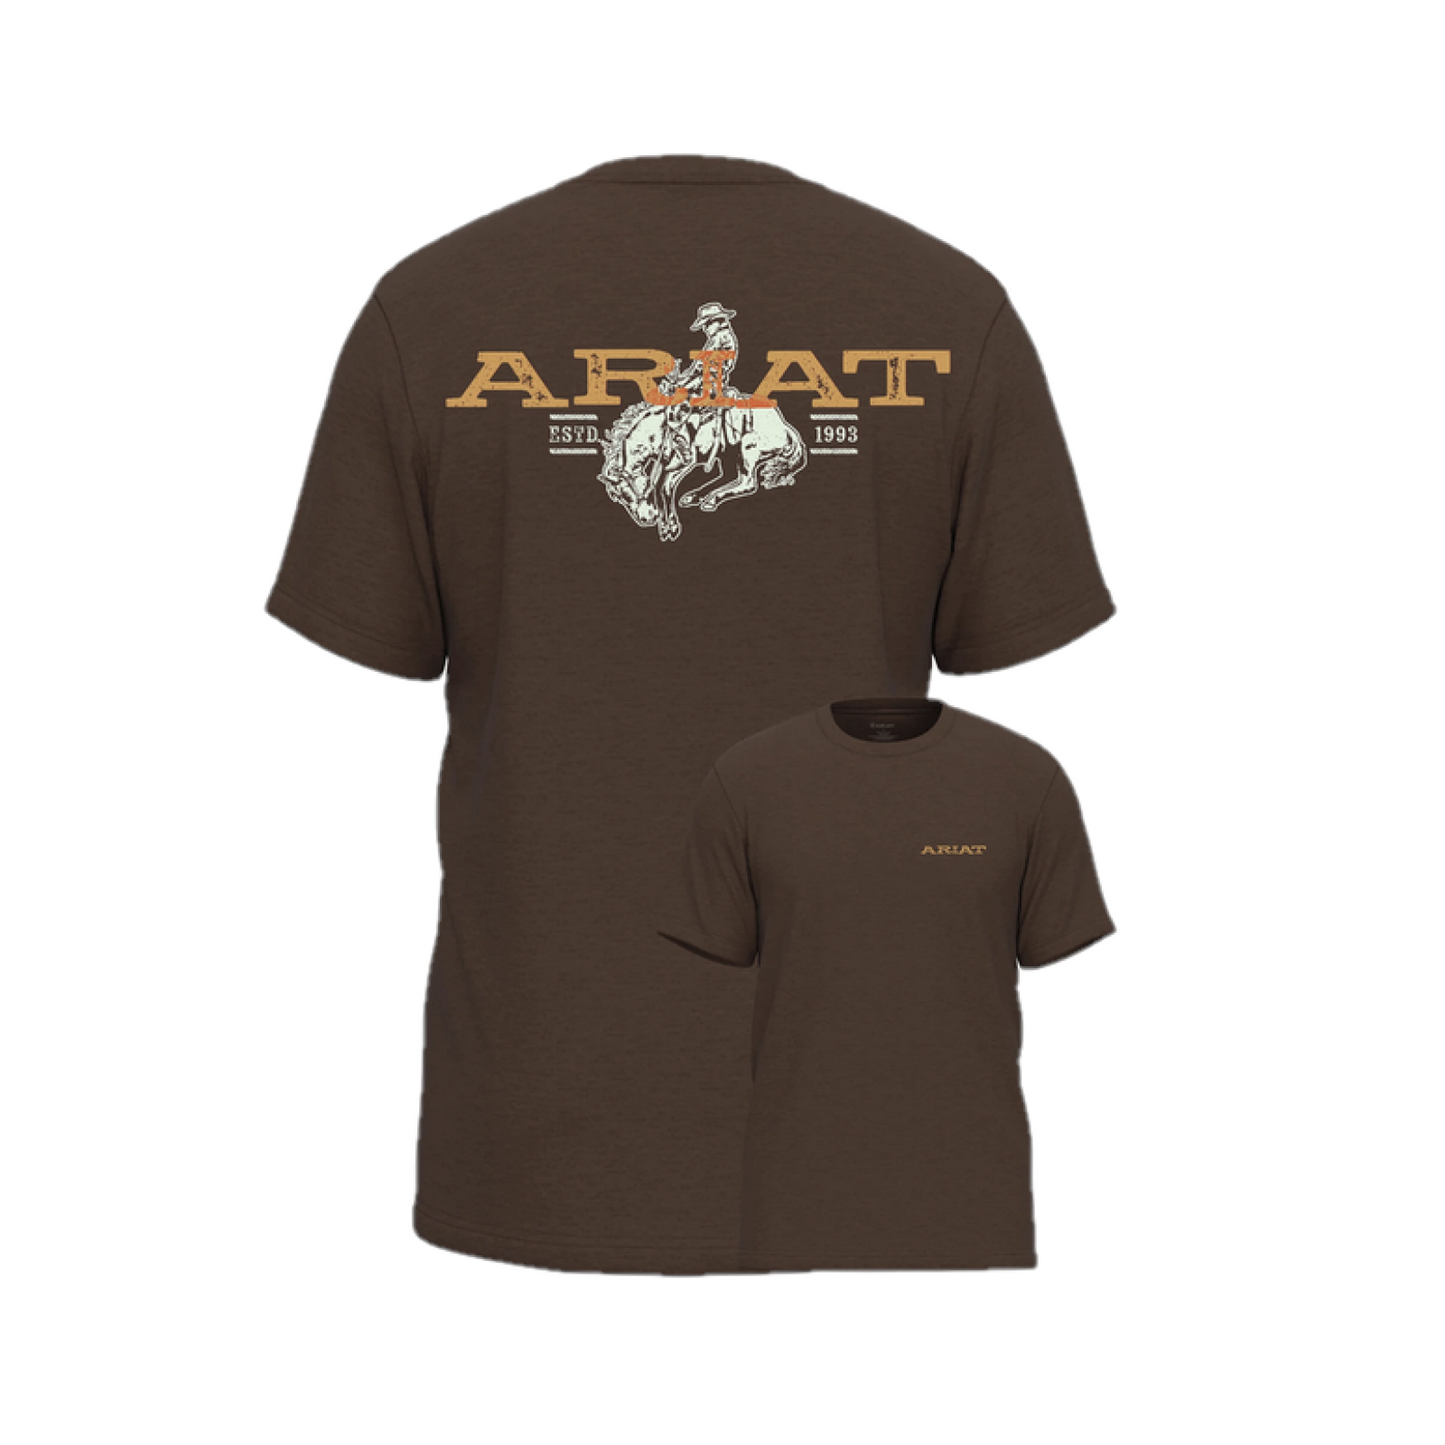 Ariat® Youth Boy's Bronc Buster Brown Heather Graphic T-Shirt 10042706